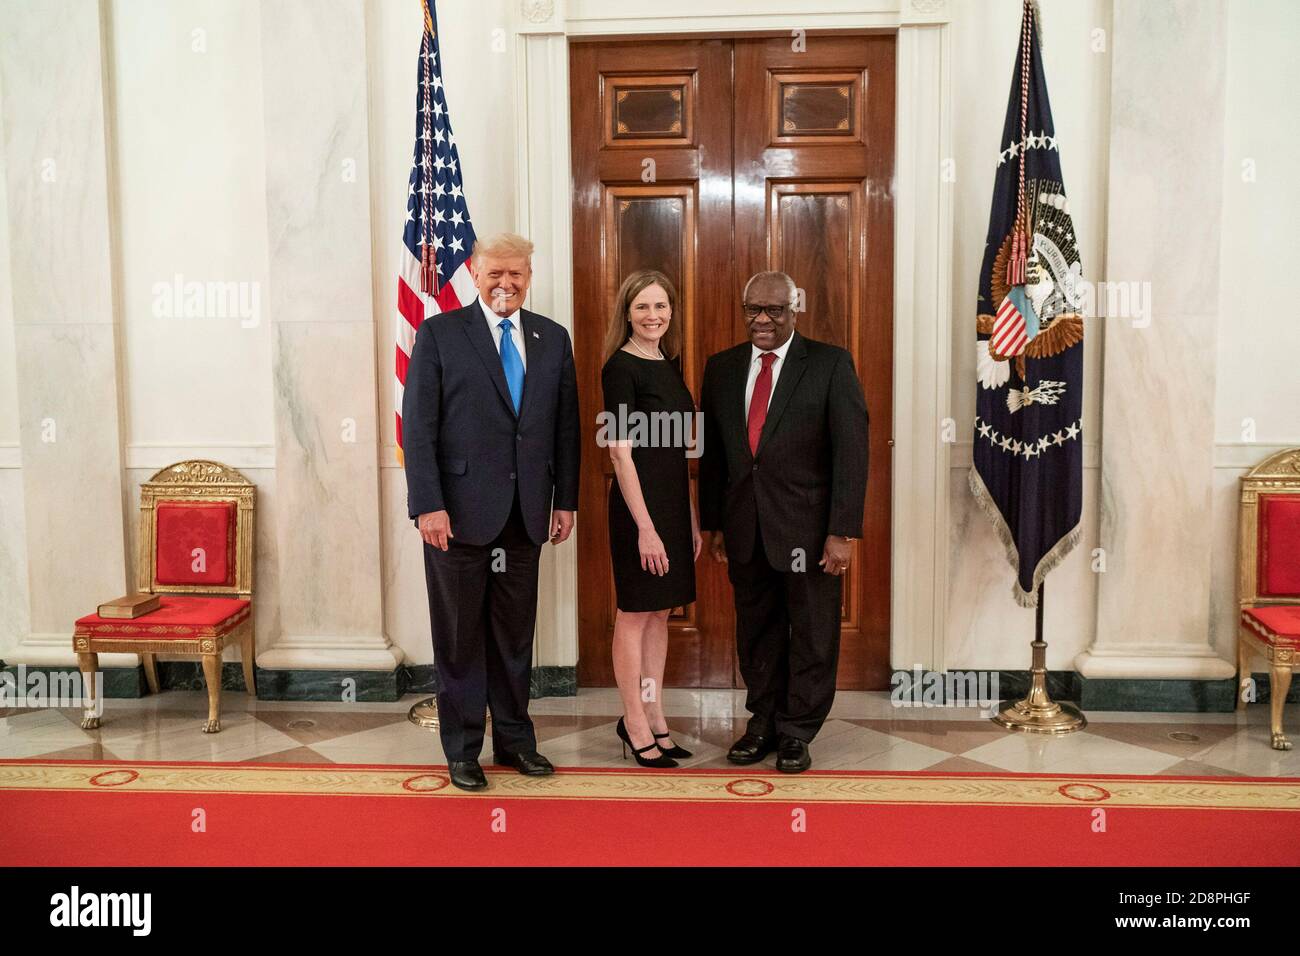 'President Donald J. Trump, joined by associate U.S. Supreme Court Justice Clarence Thomas, poses with Judge Amy Coney Barrett  in the Cross Hall of the White House following her swearing-in as Associate Justice of the U.S. Supreme Court Monday, Oct. 26, 2020, on the South Lawn of the White House. (Please credit Shealah Craighead)' Stock Photo